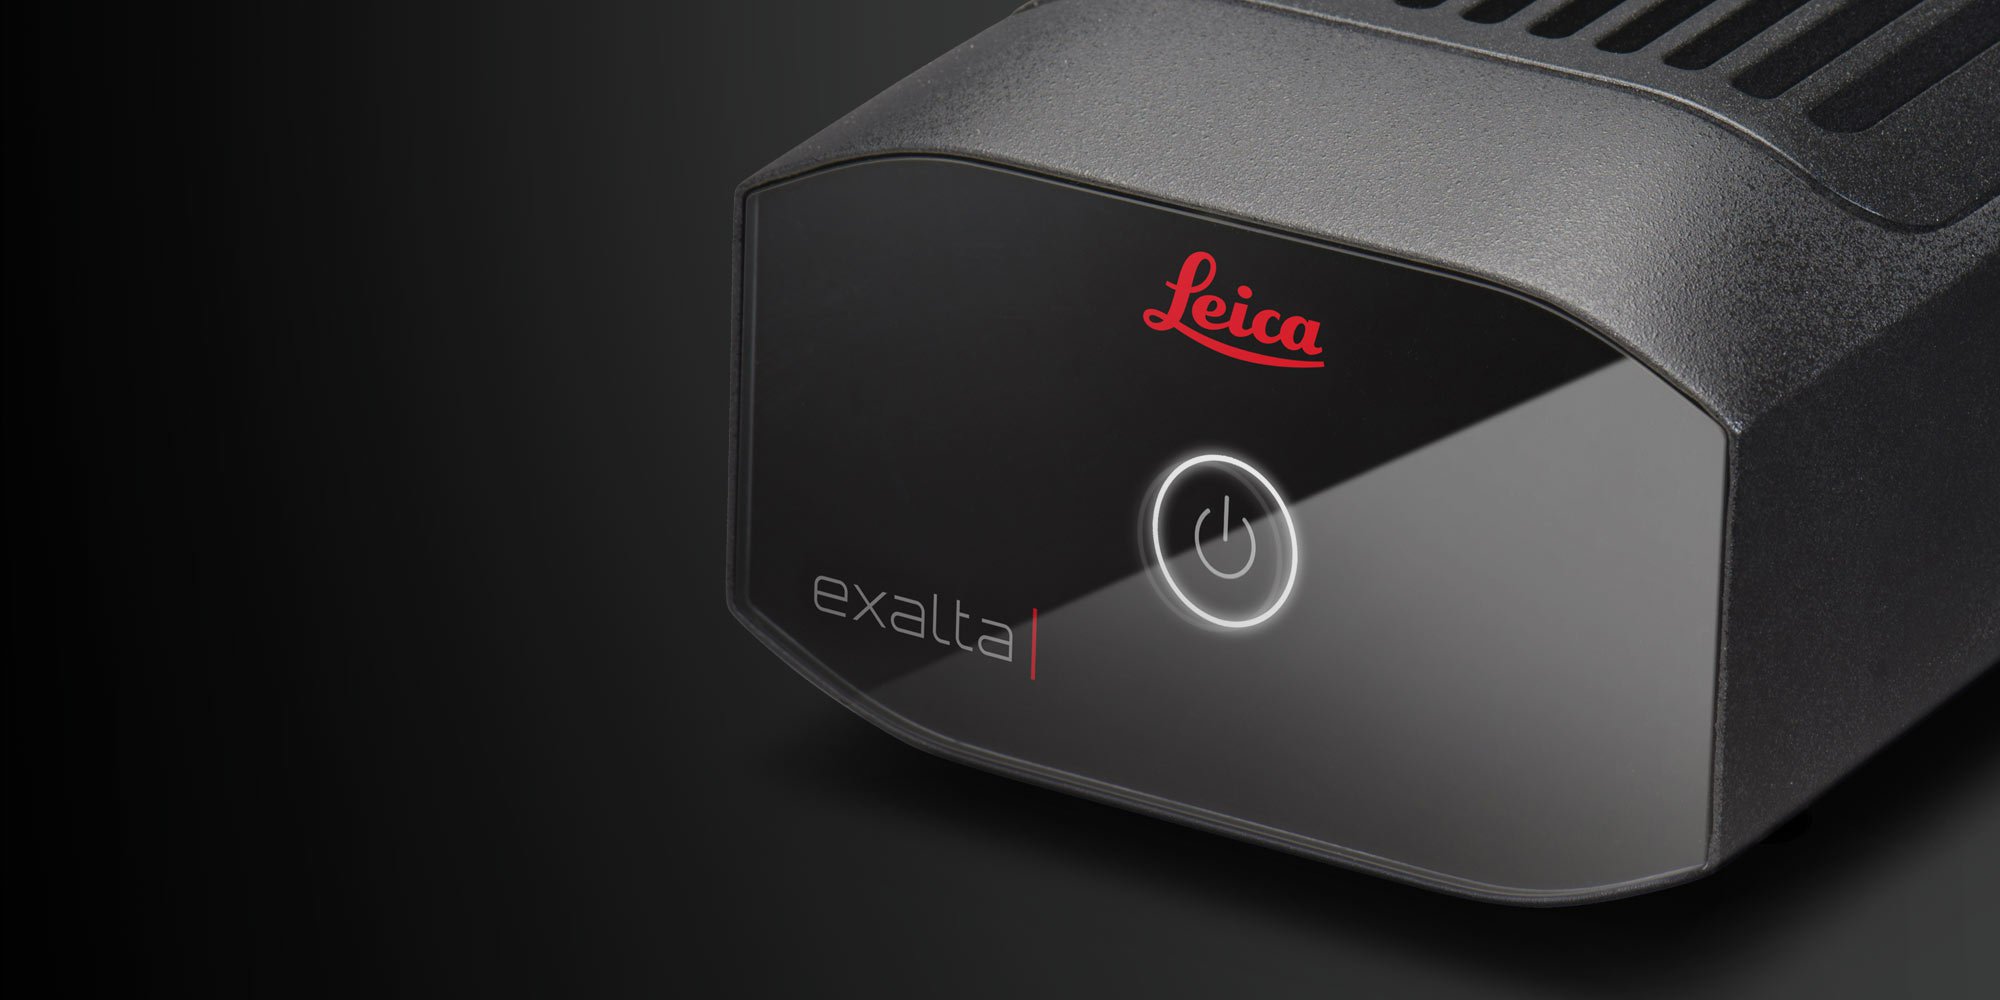 Exalta smart device for consistent results, distributed in Australia by IDM Instruments Melbourne